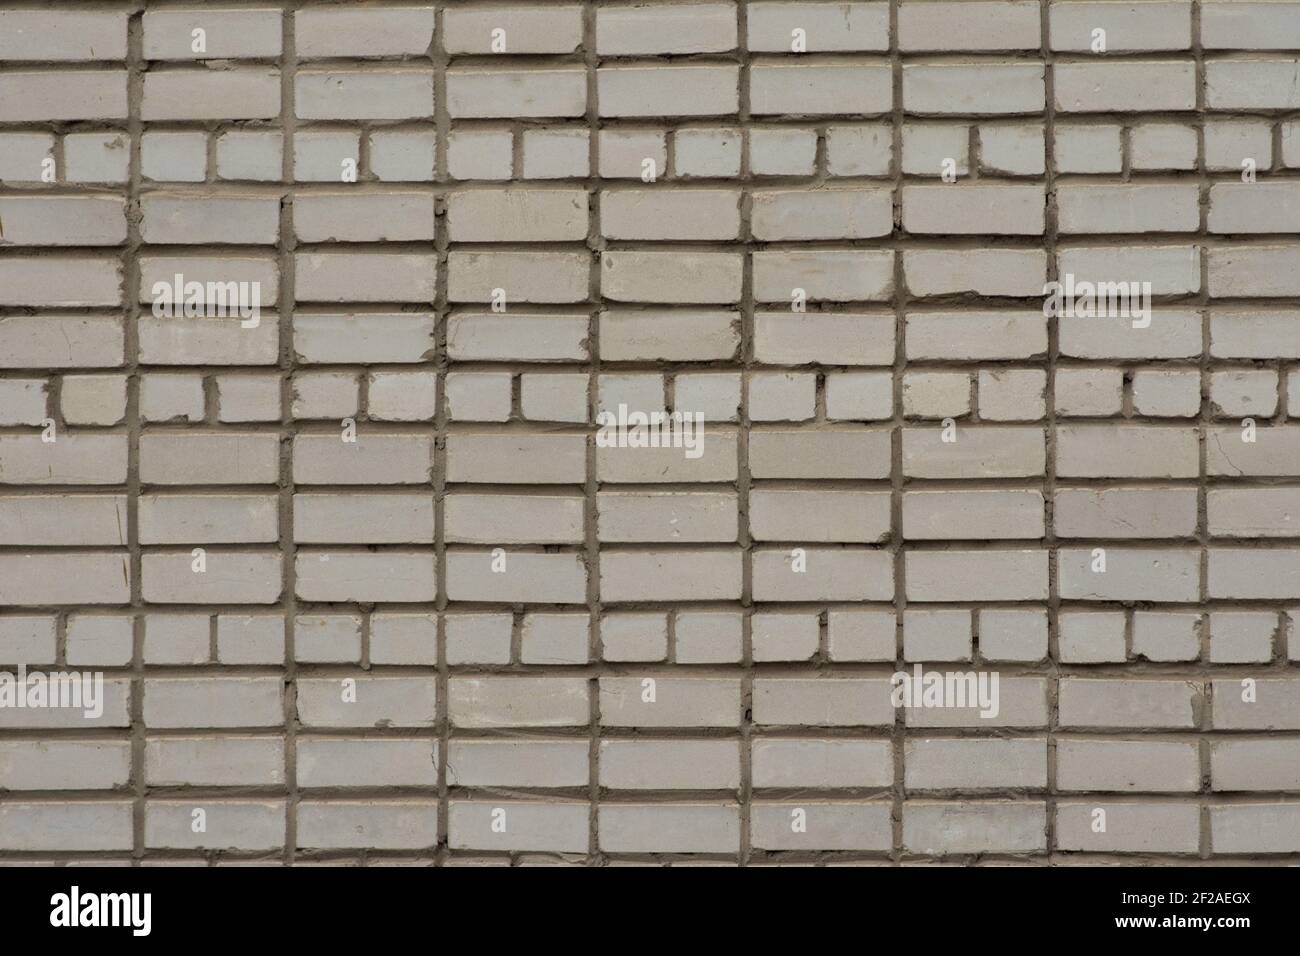 White brick wall. Part of the wall of a tall building. Stock Photo